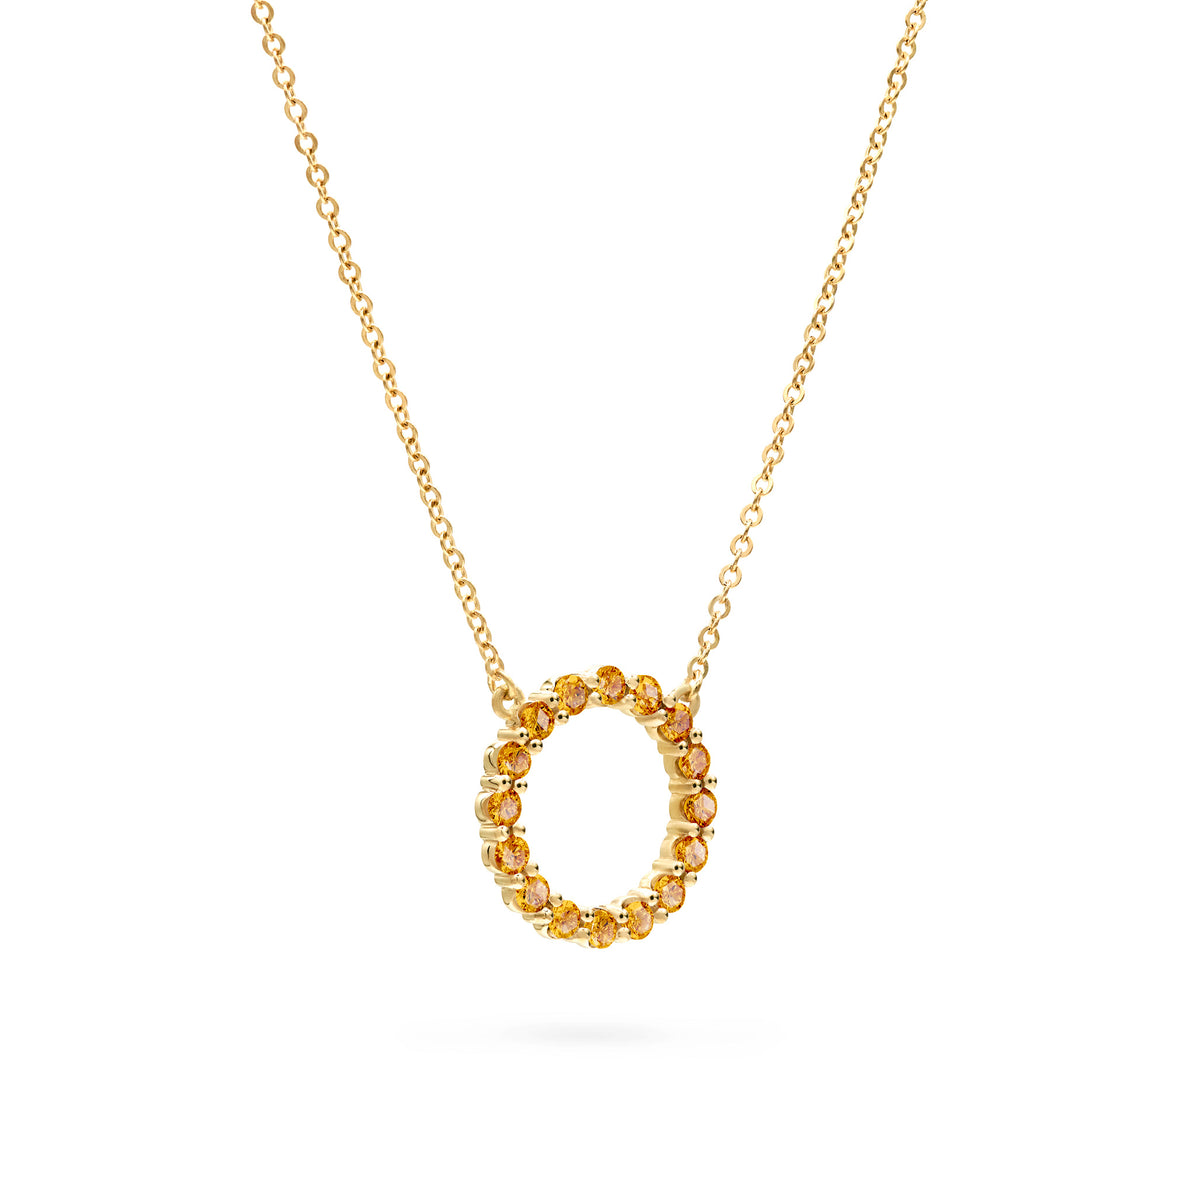 Rosecliff Circle Citrine Necklace in 14k Gold (November) - 14k Yellow Gold  / X-Small (15”)